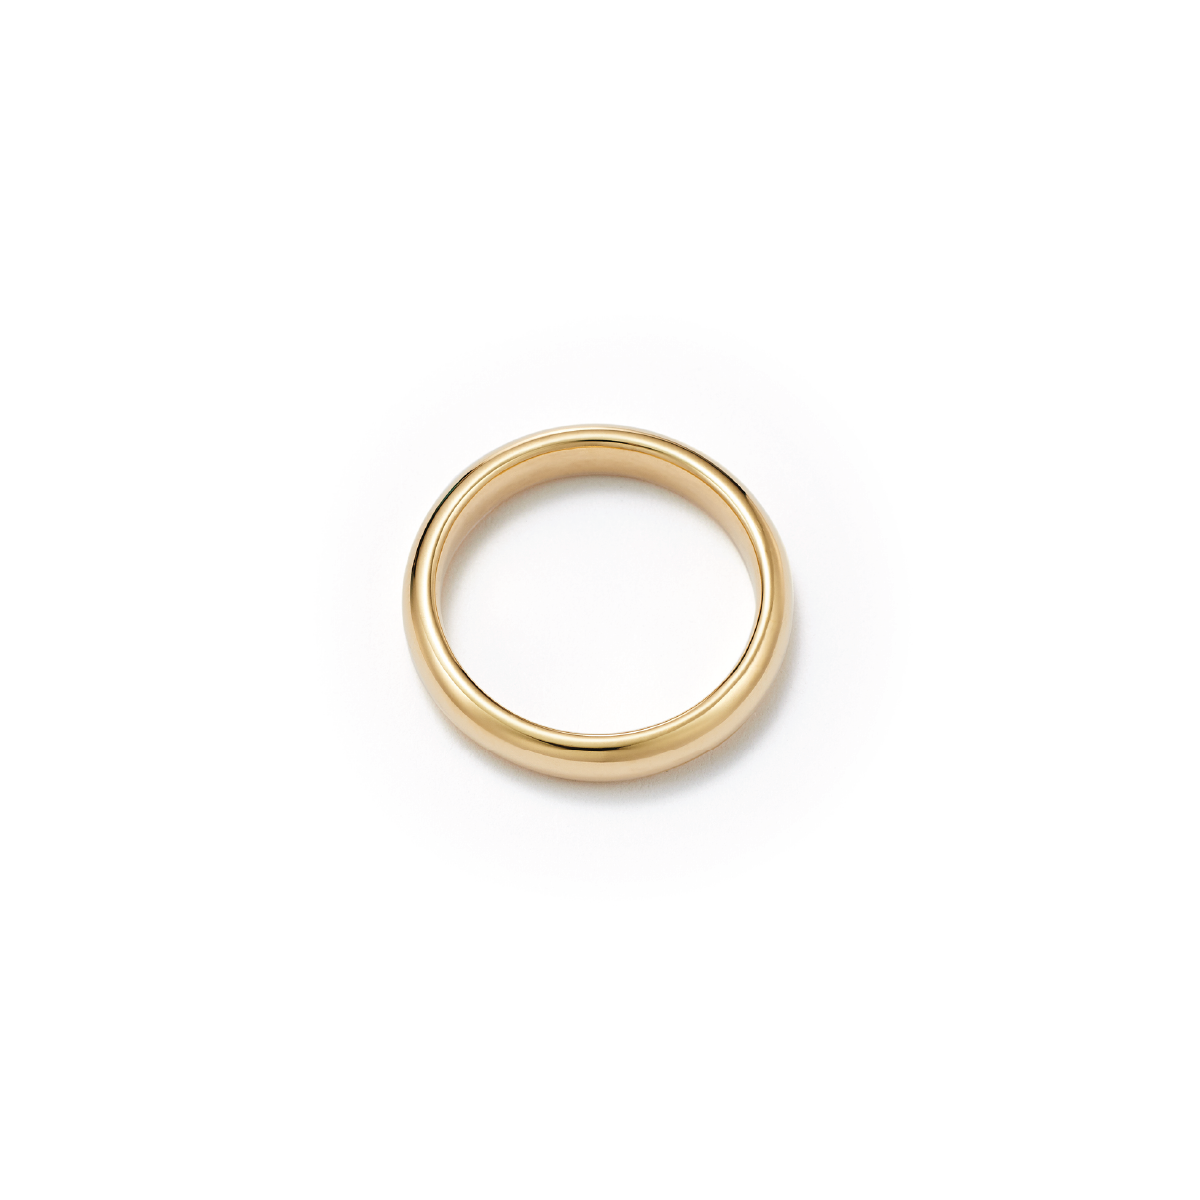 Eco-Friendly Classic Gold Wedding Ring / Wedding Band - Top View